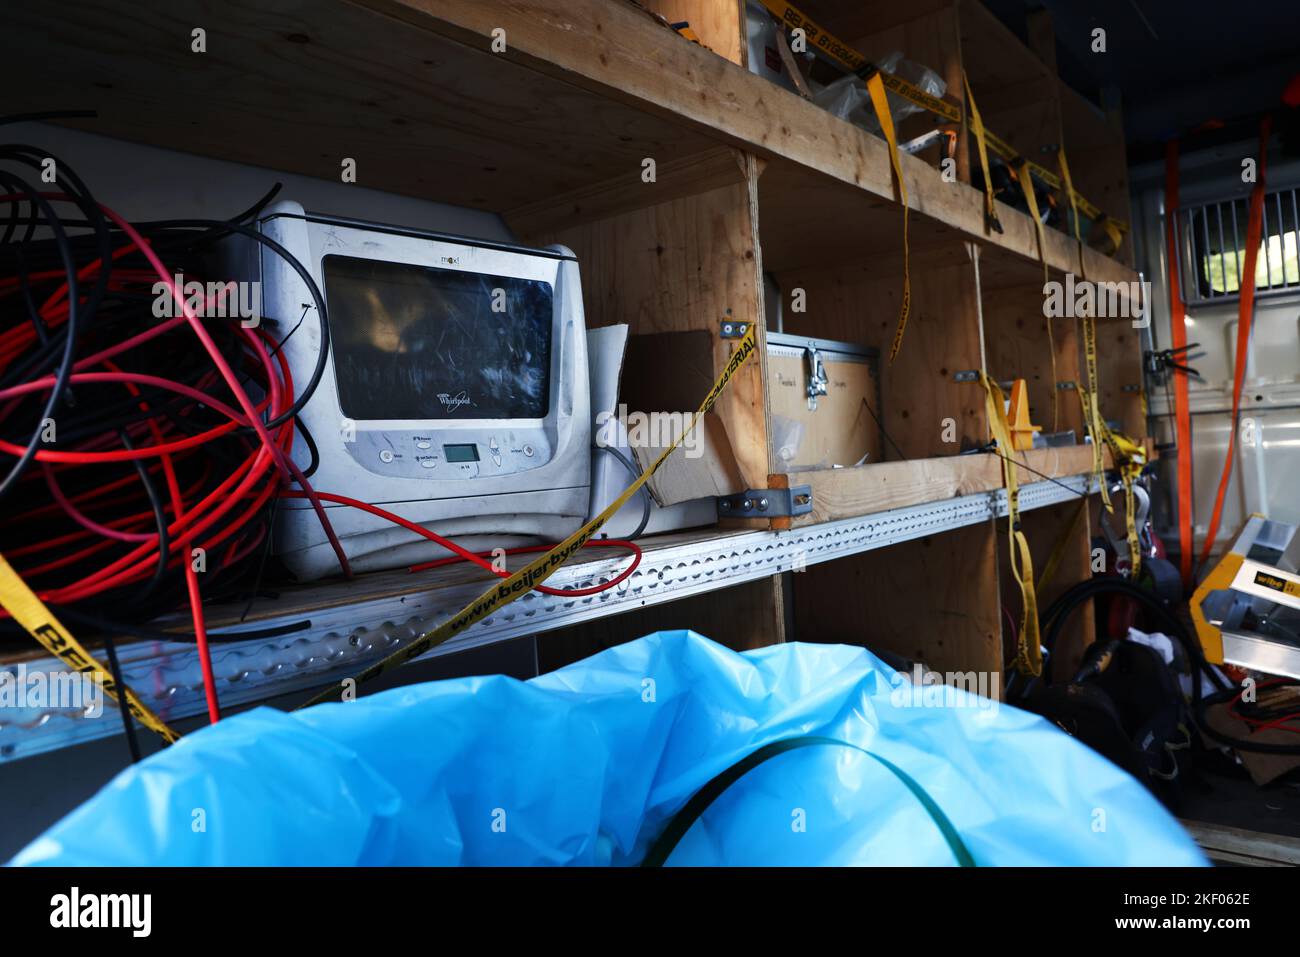 A craftsman's work bus with machines and work materials. In the picture: A microwave to heat food for the workers when they are on installation assignments. Stock Photo